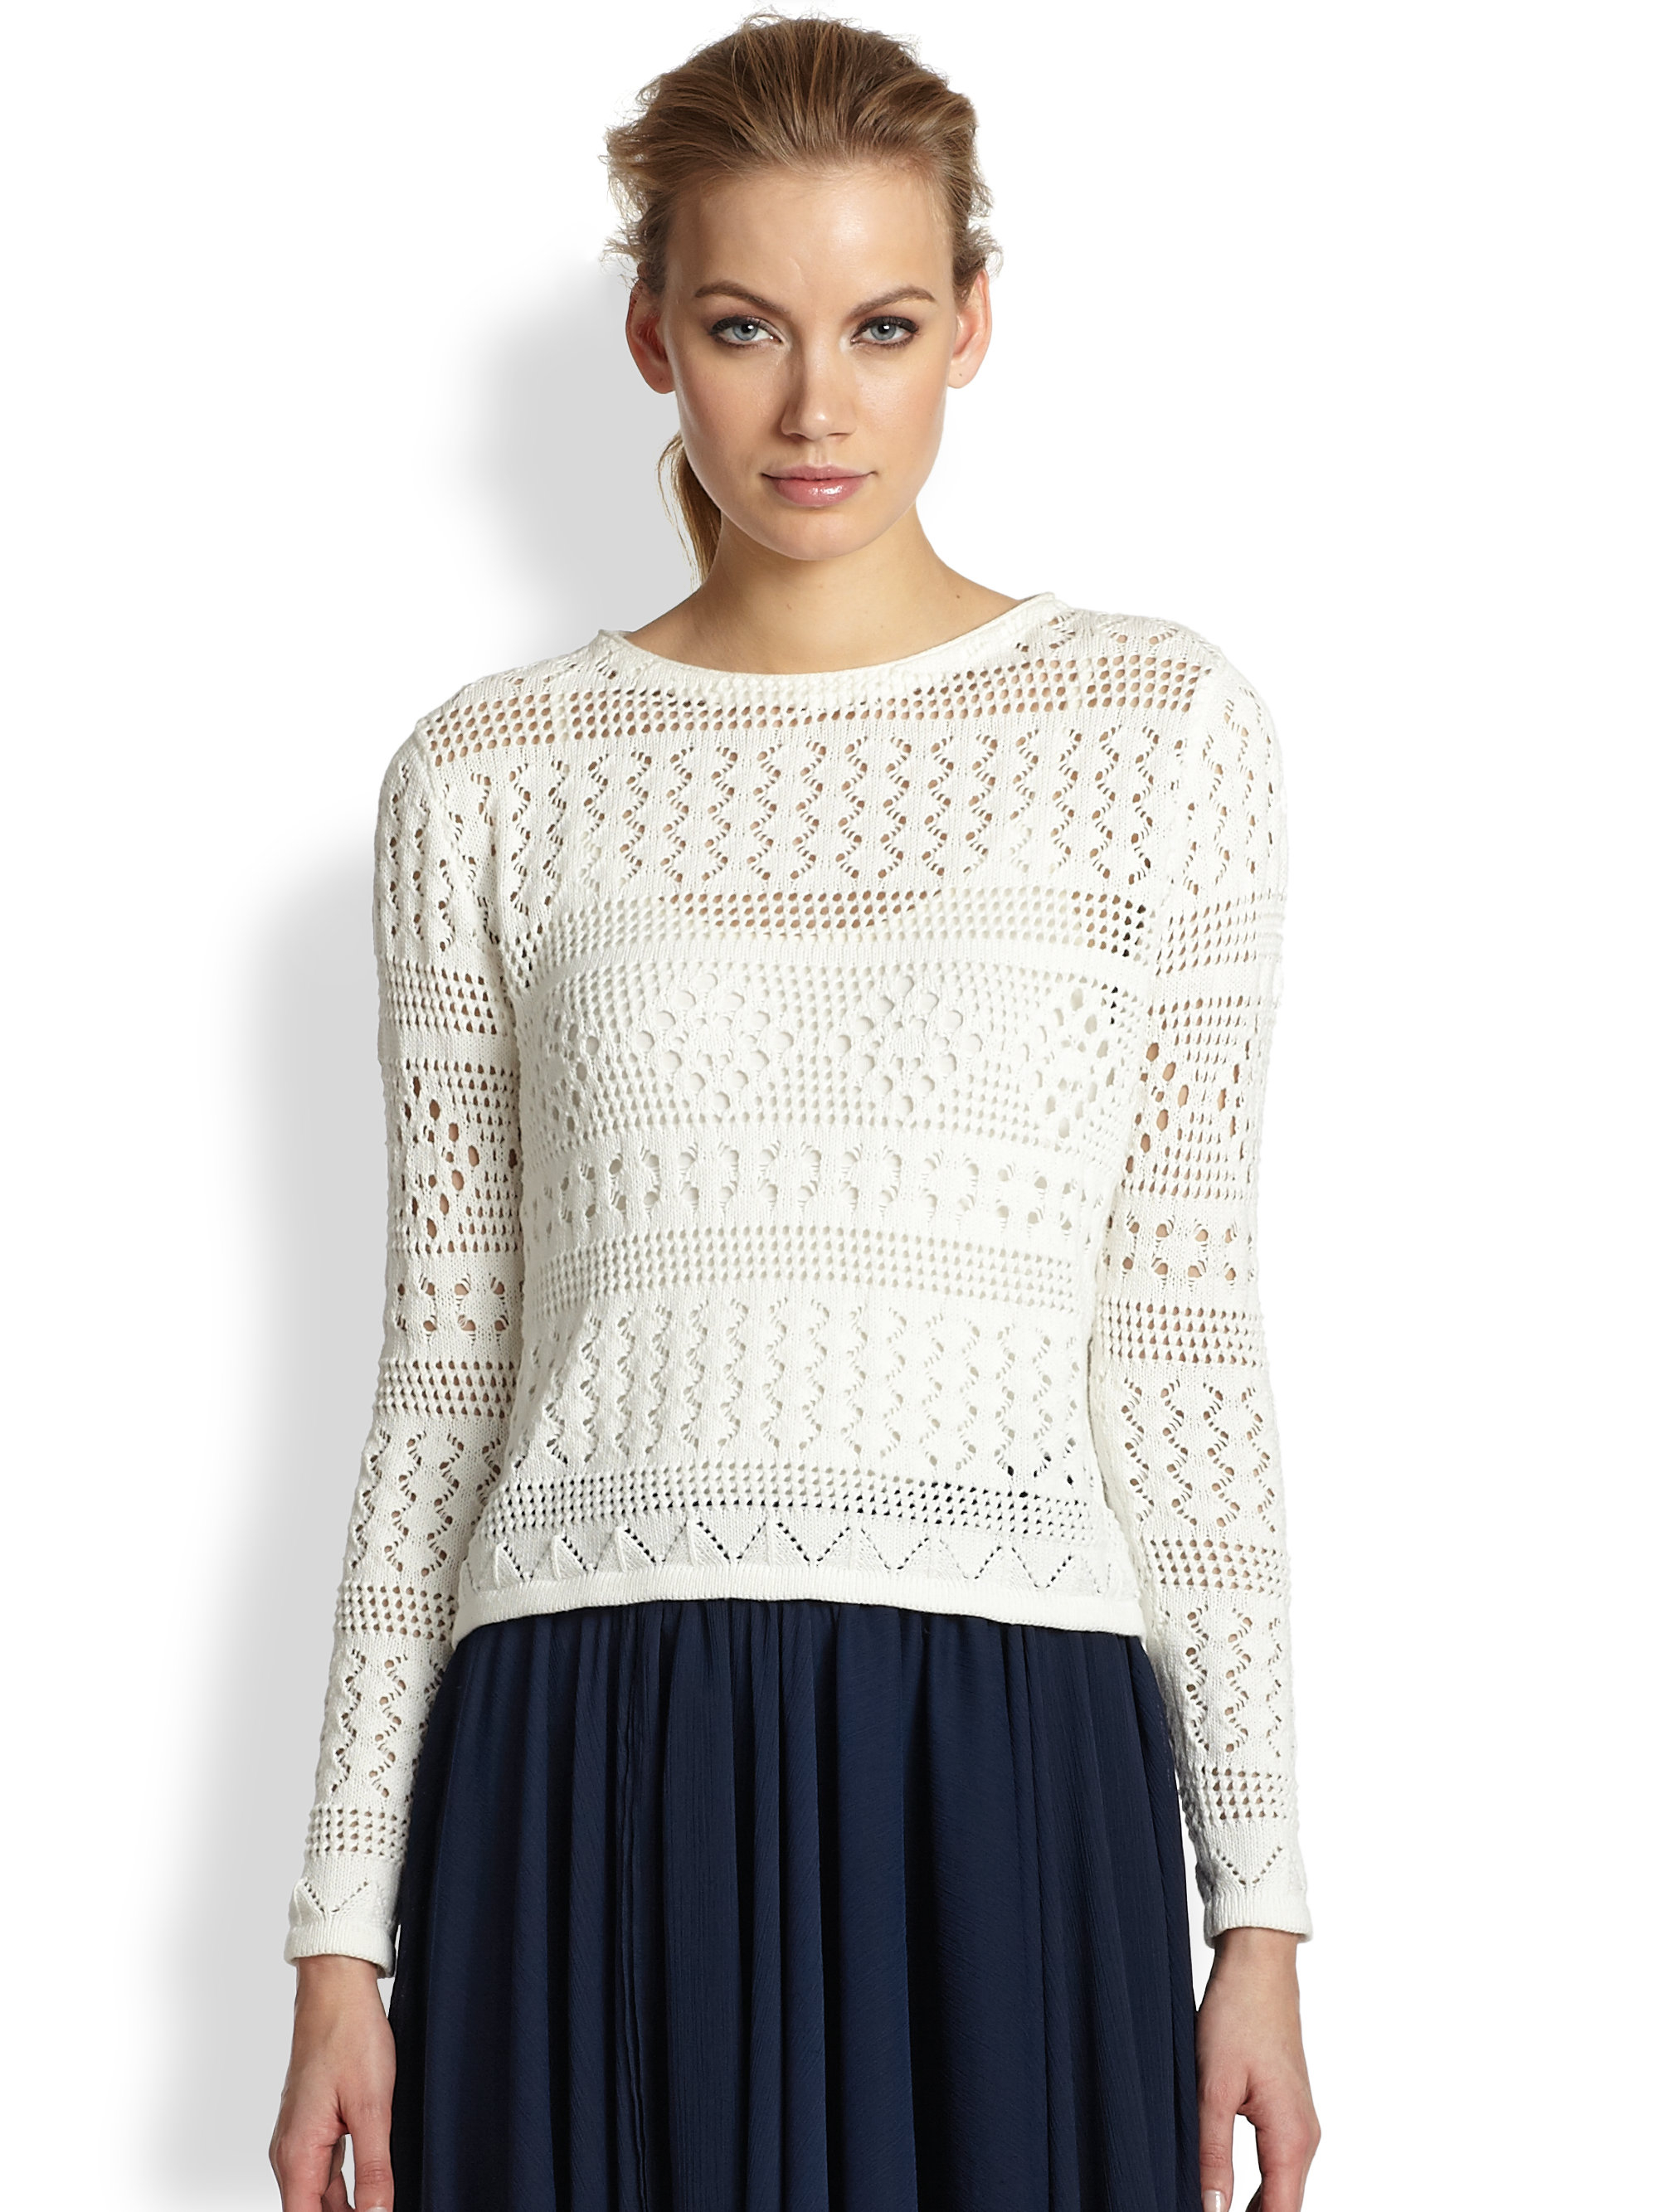 Alice + olivia Dorie Boxy Cropped Lace Sweater in White | Lyst